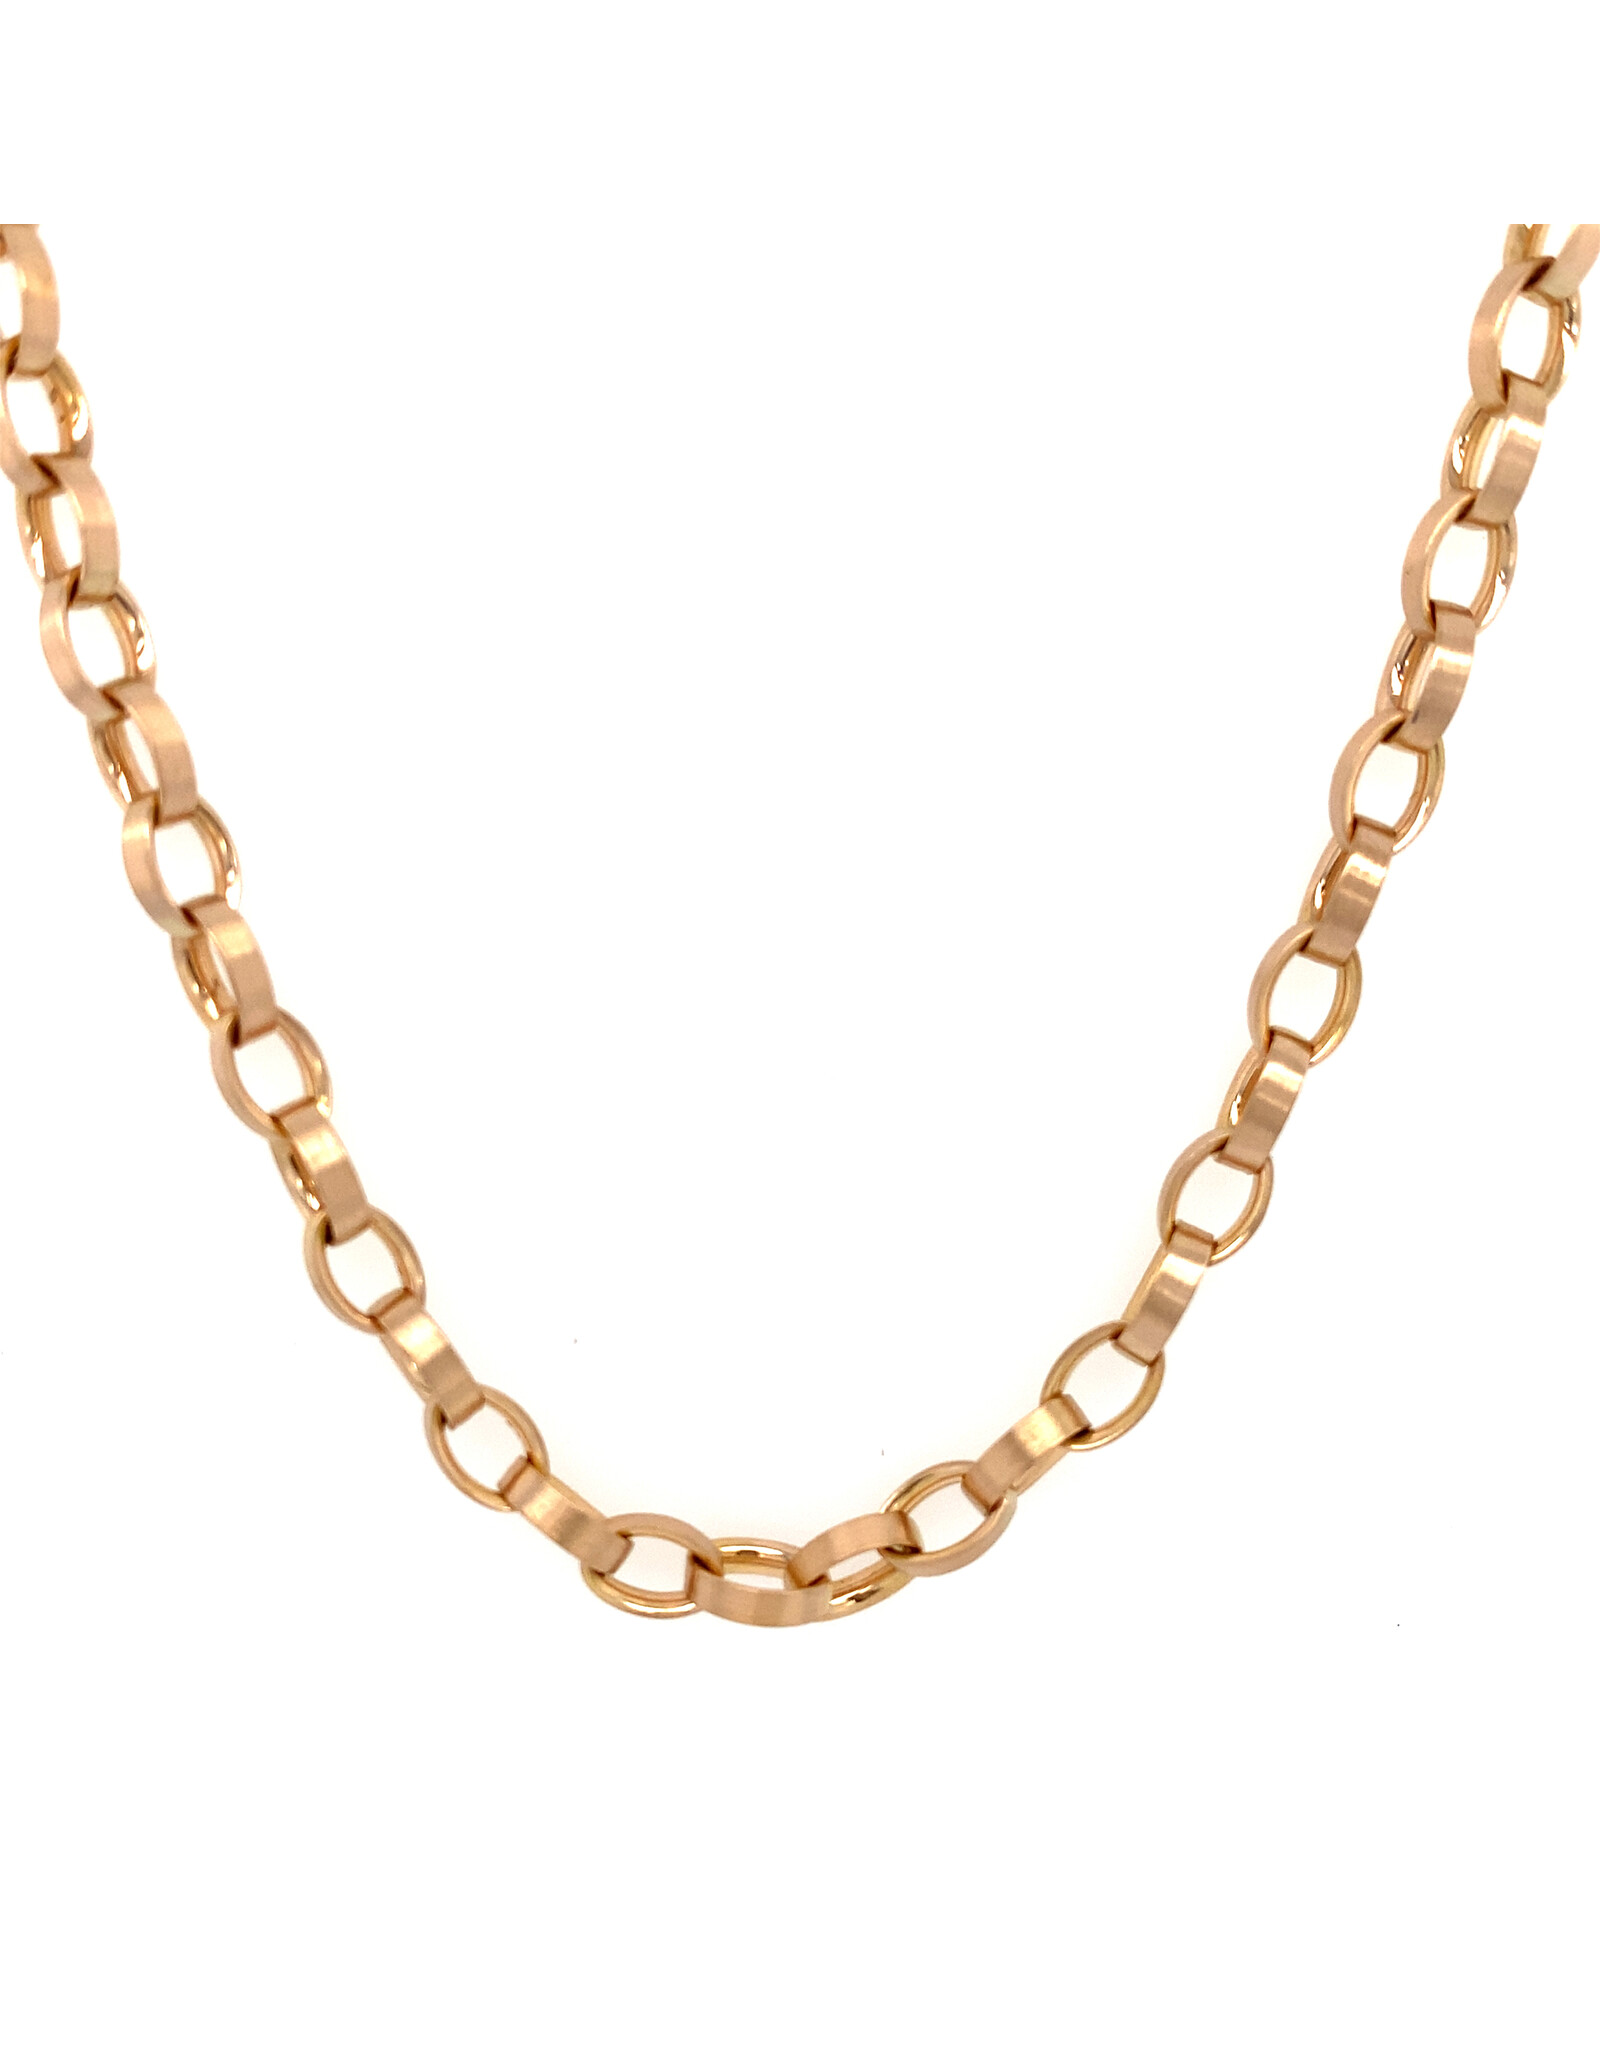 Clioro Collier rood goud